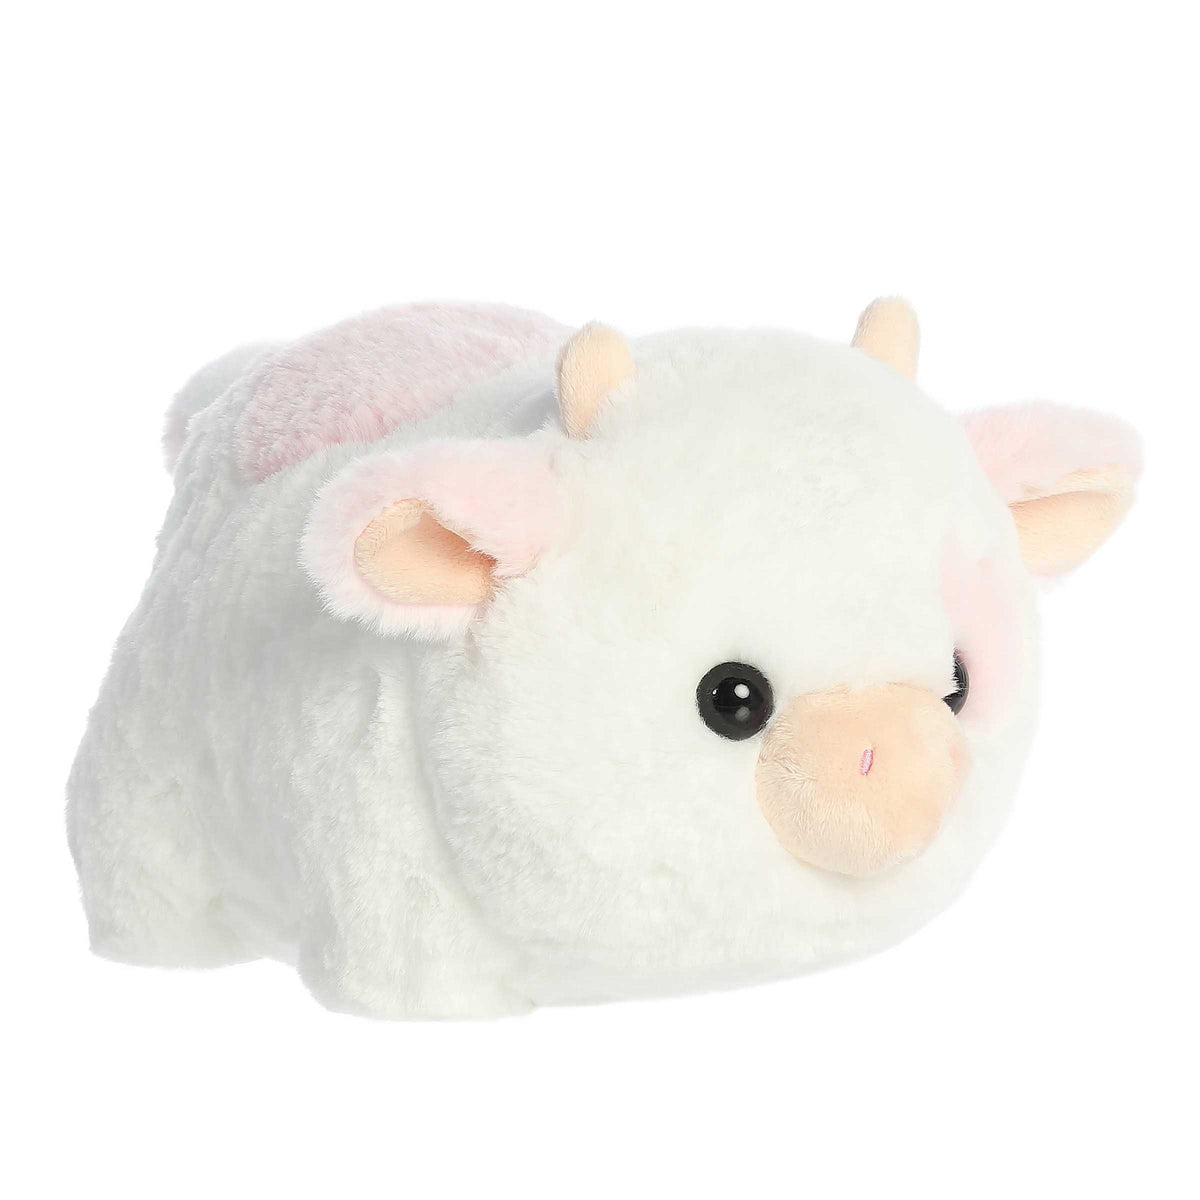 Cow plush with a white body, strawberry pink spots, peach-cream nose, and horns, embodying the Spudsters charm.